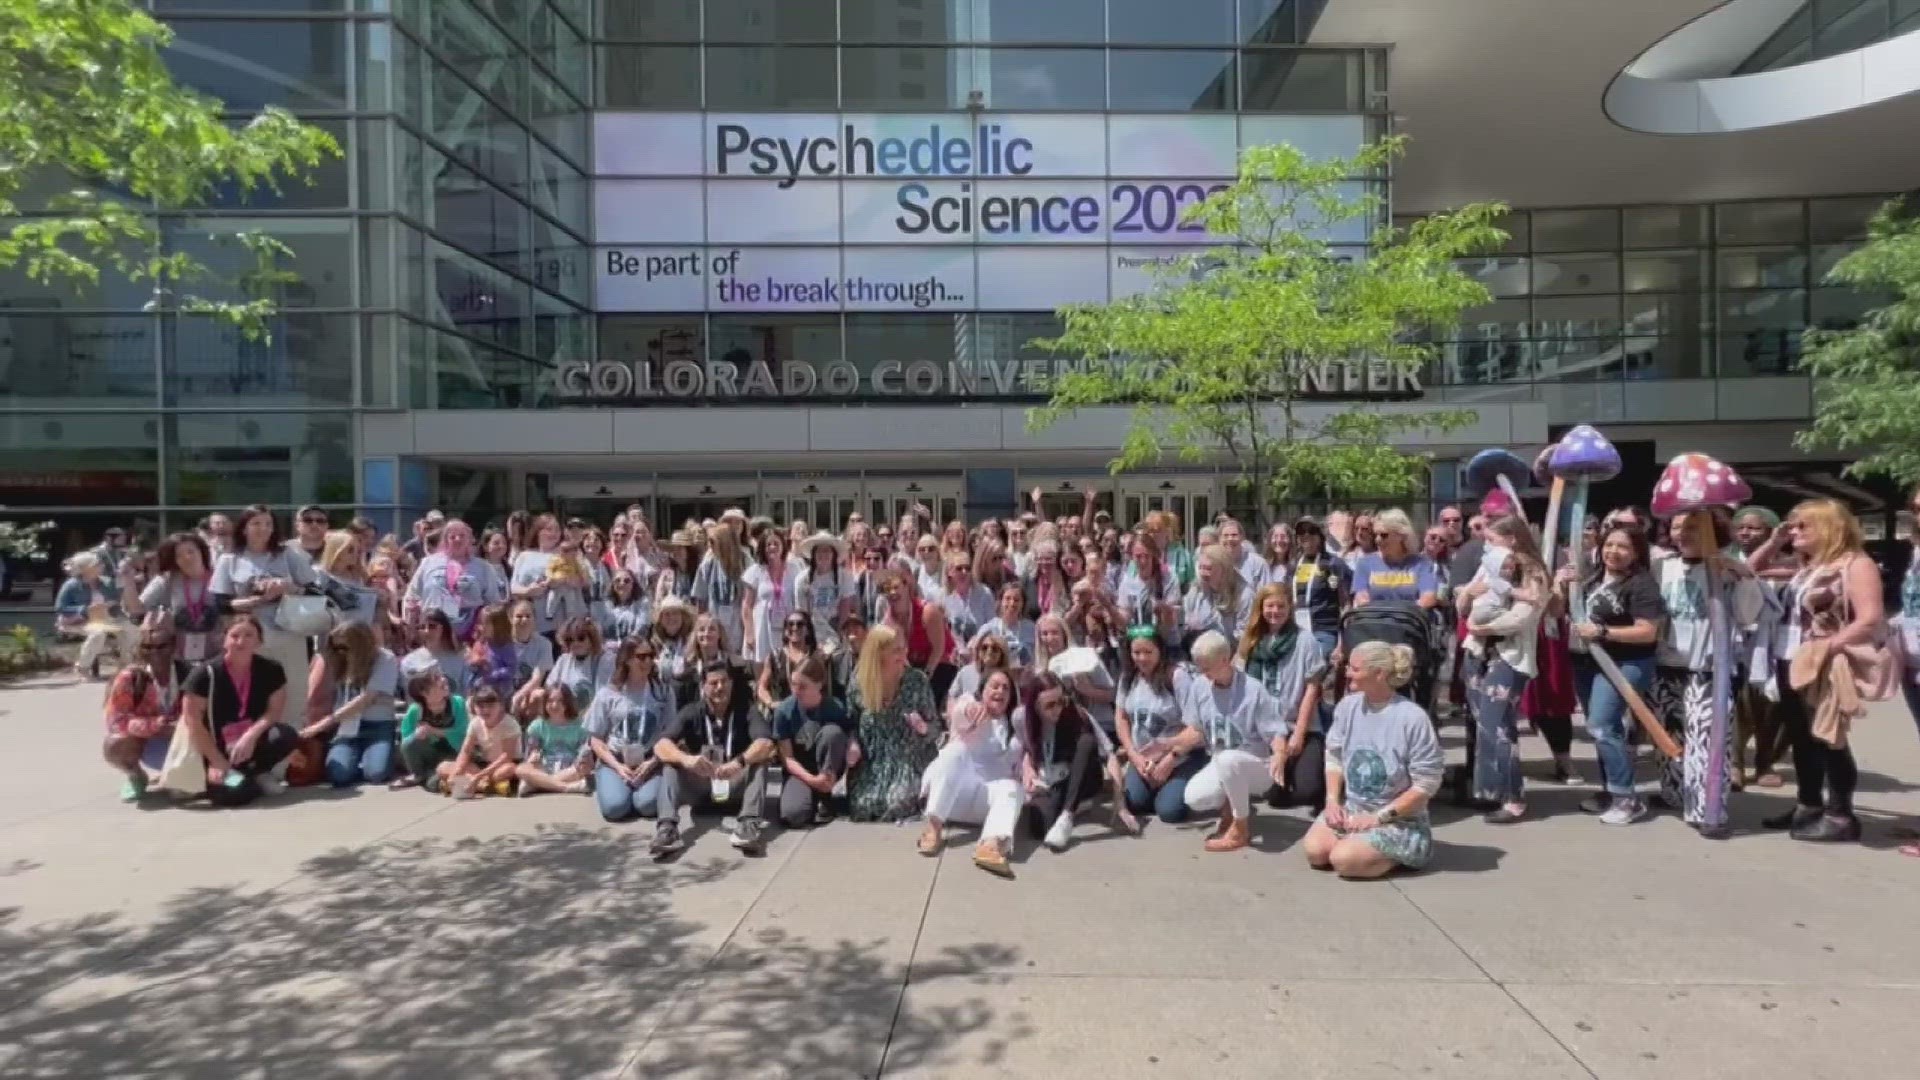 A new group named “Millions of Moms” gathered for the first time in Colorado to announce their efforts to press the government about psychedelic assisted therapy.